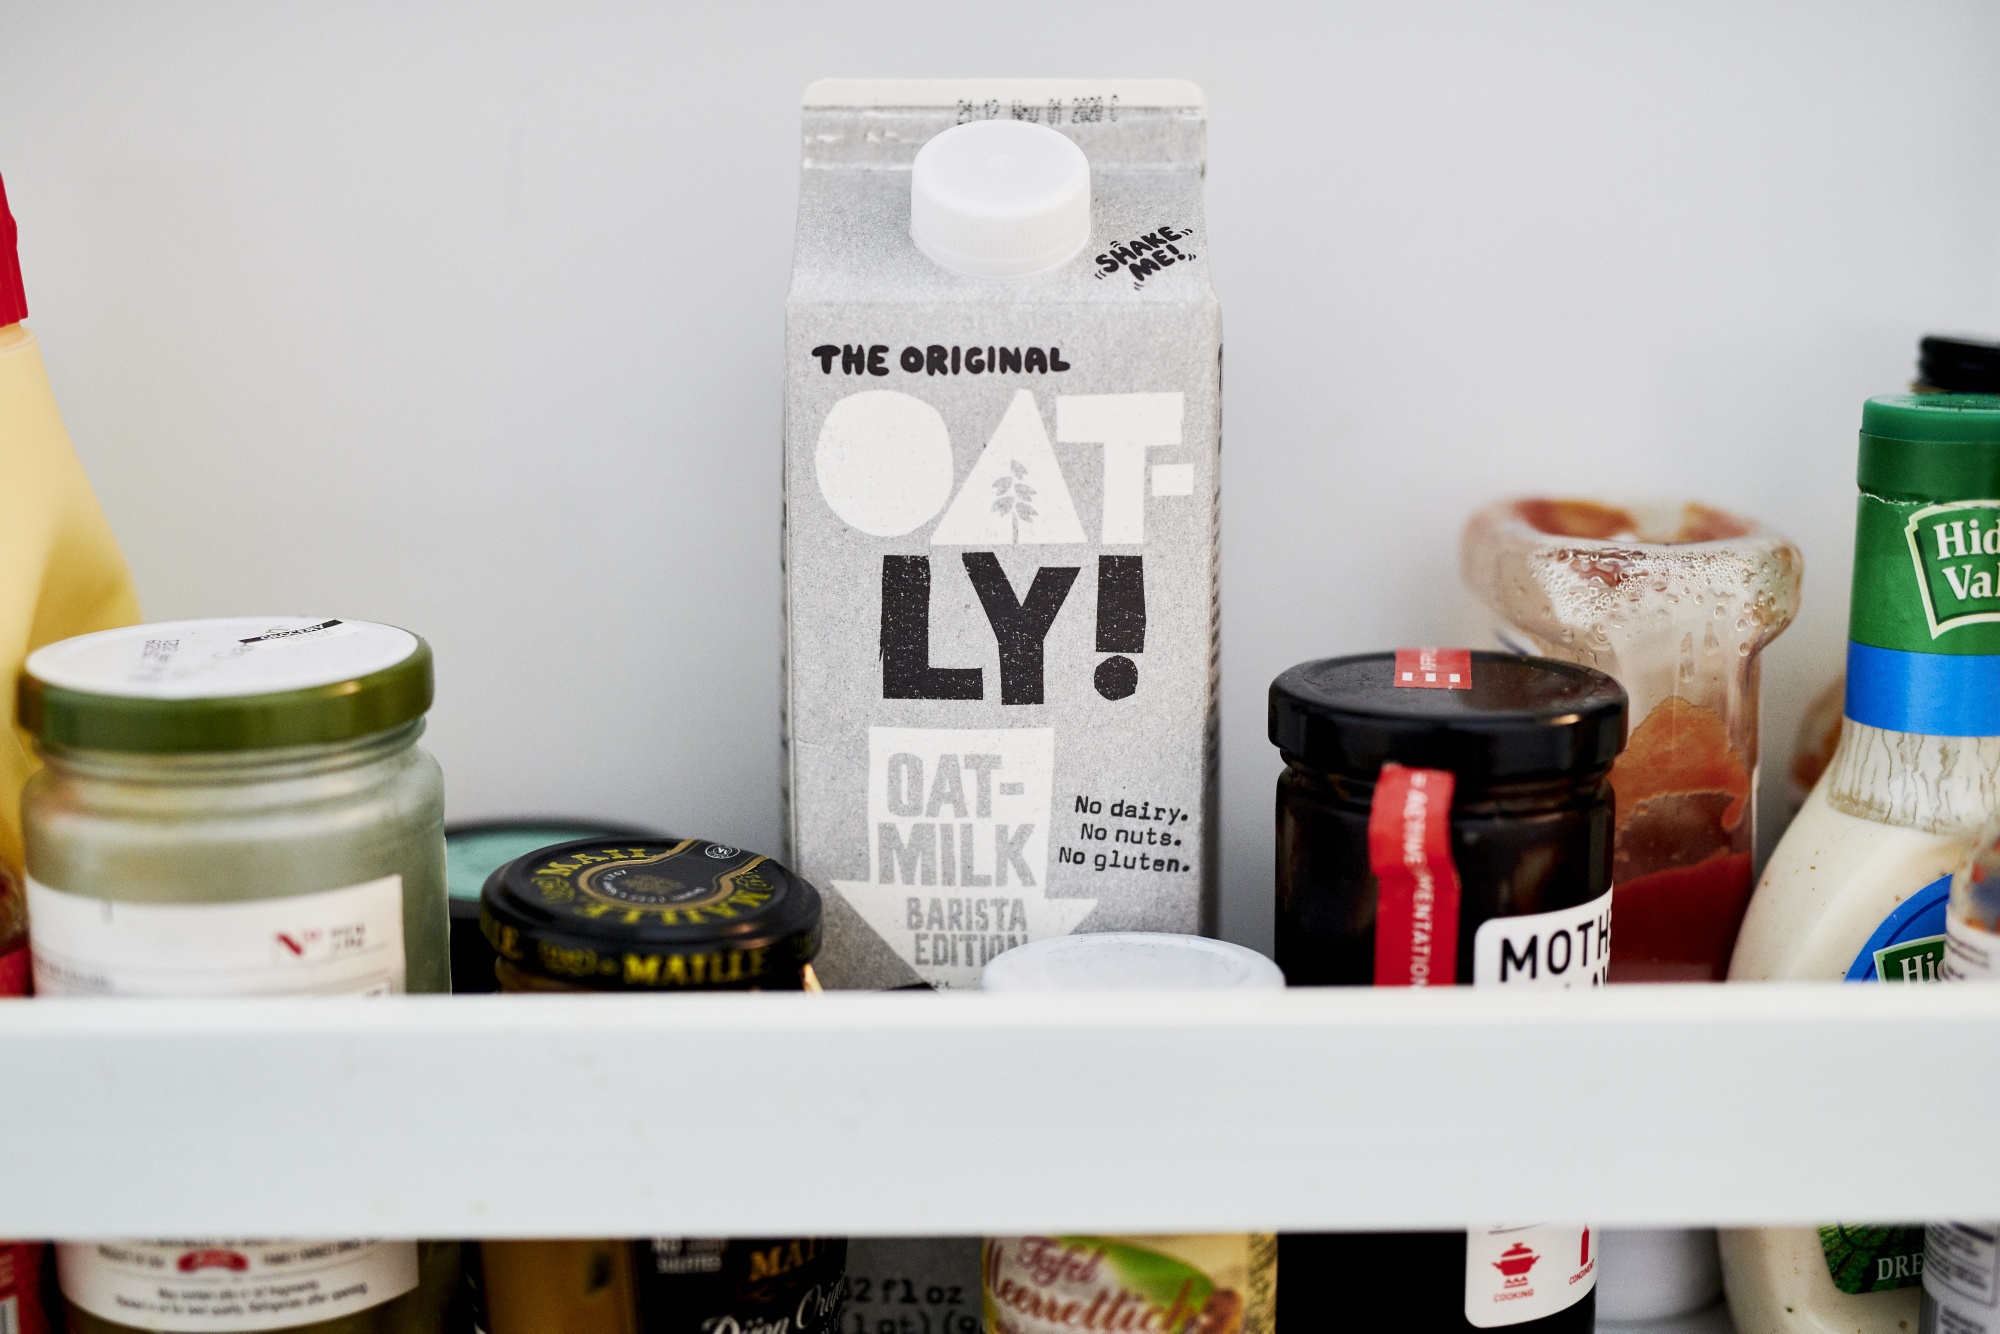 Oatly aiming to address supply issues